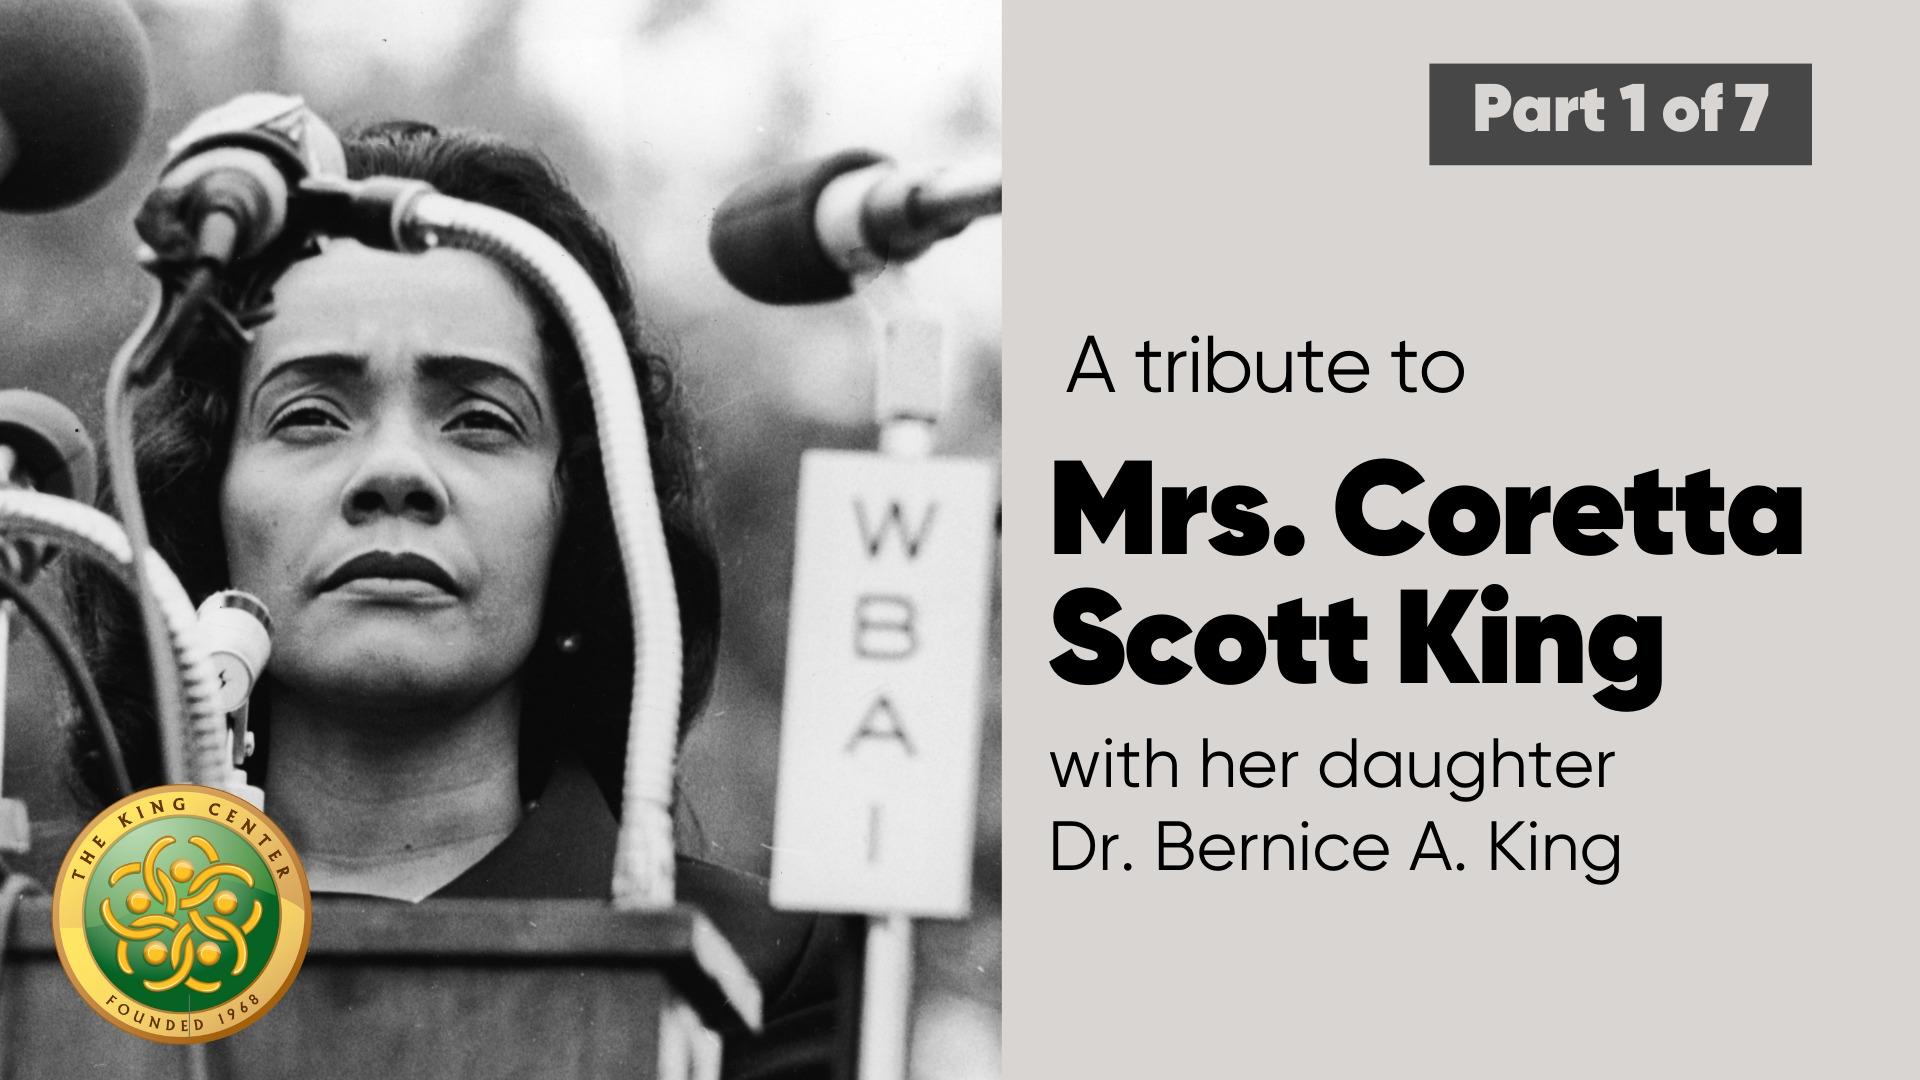 A tribute to Mrs. Coretta Scott King with her daughter Dr. Bernice A. King- Part 1 of 7